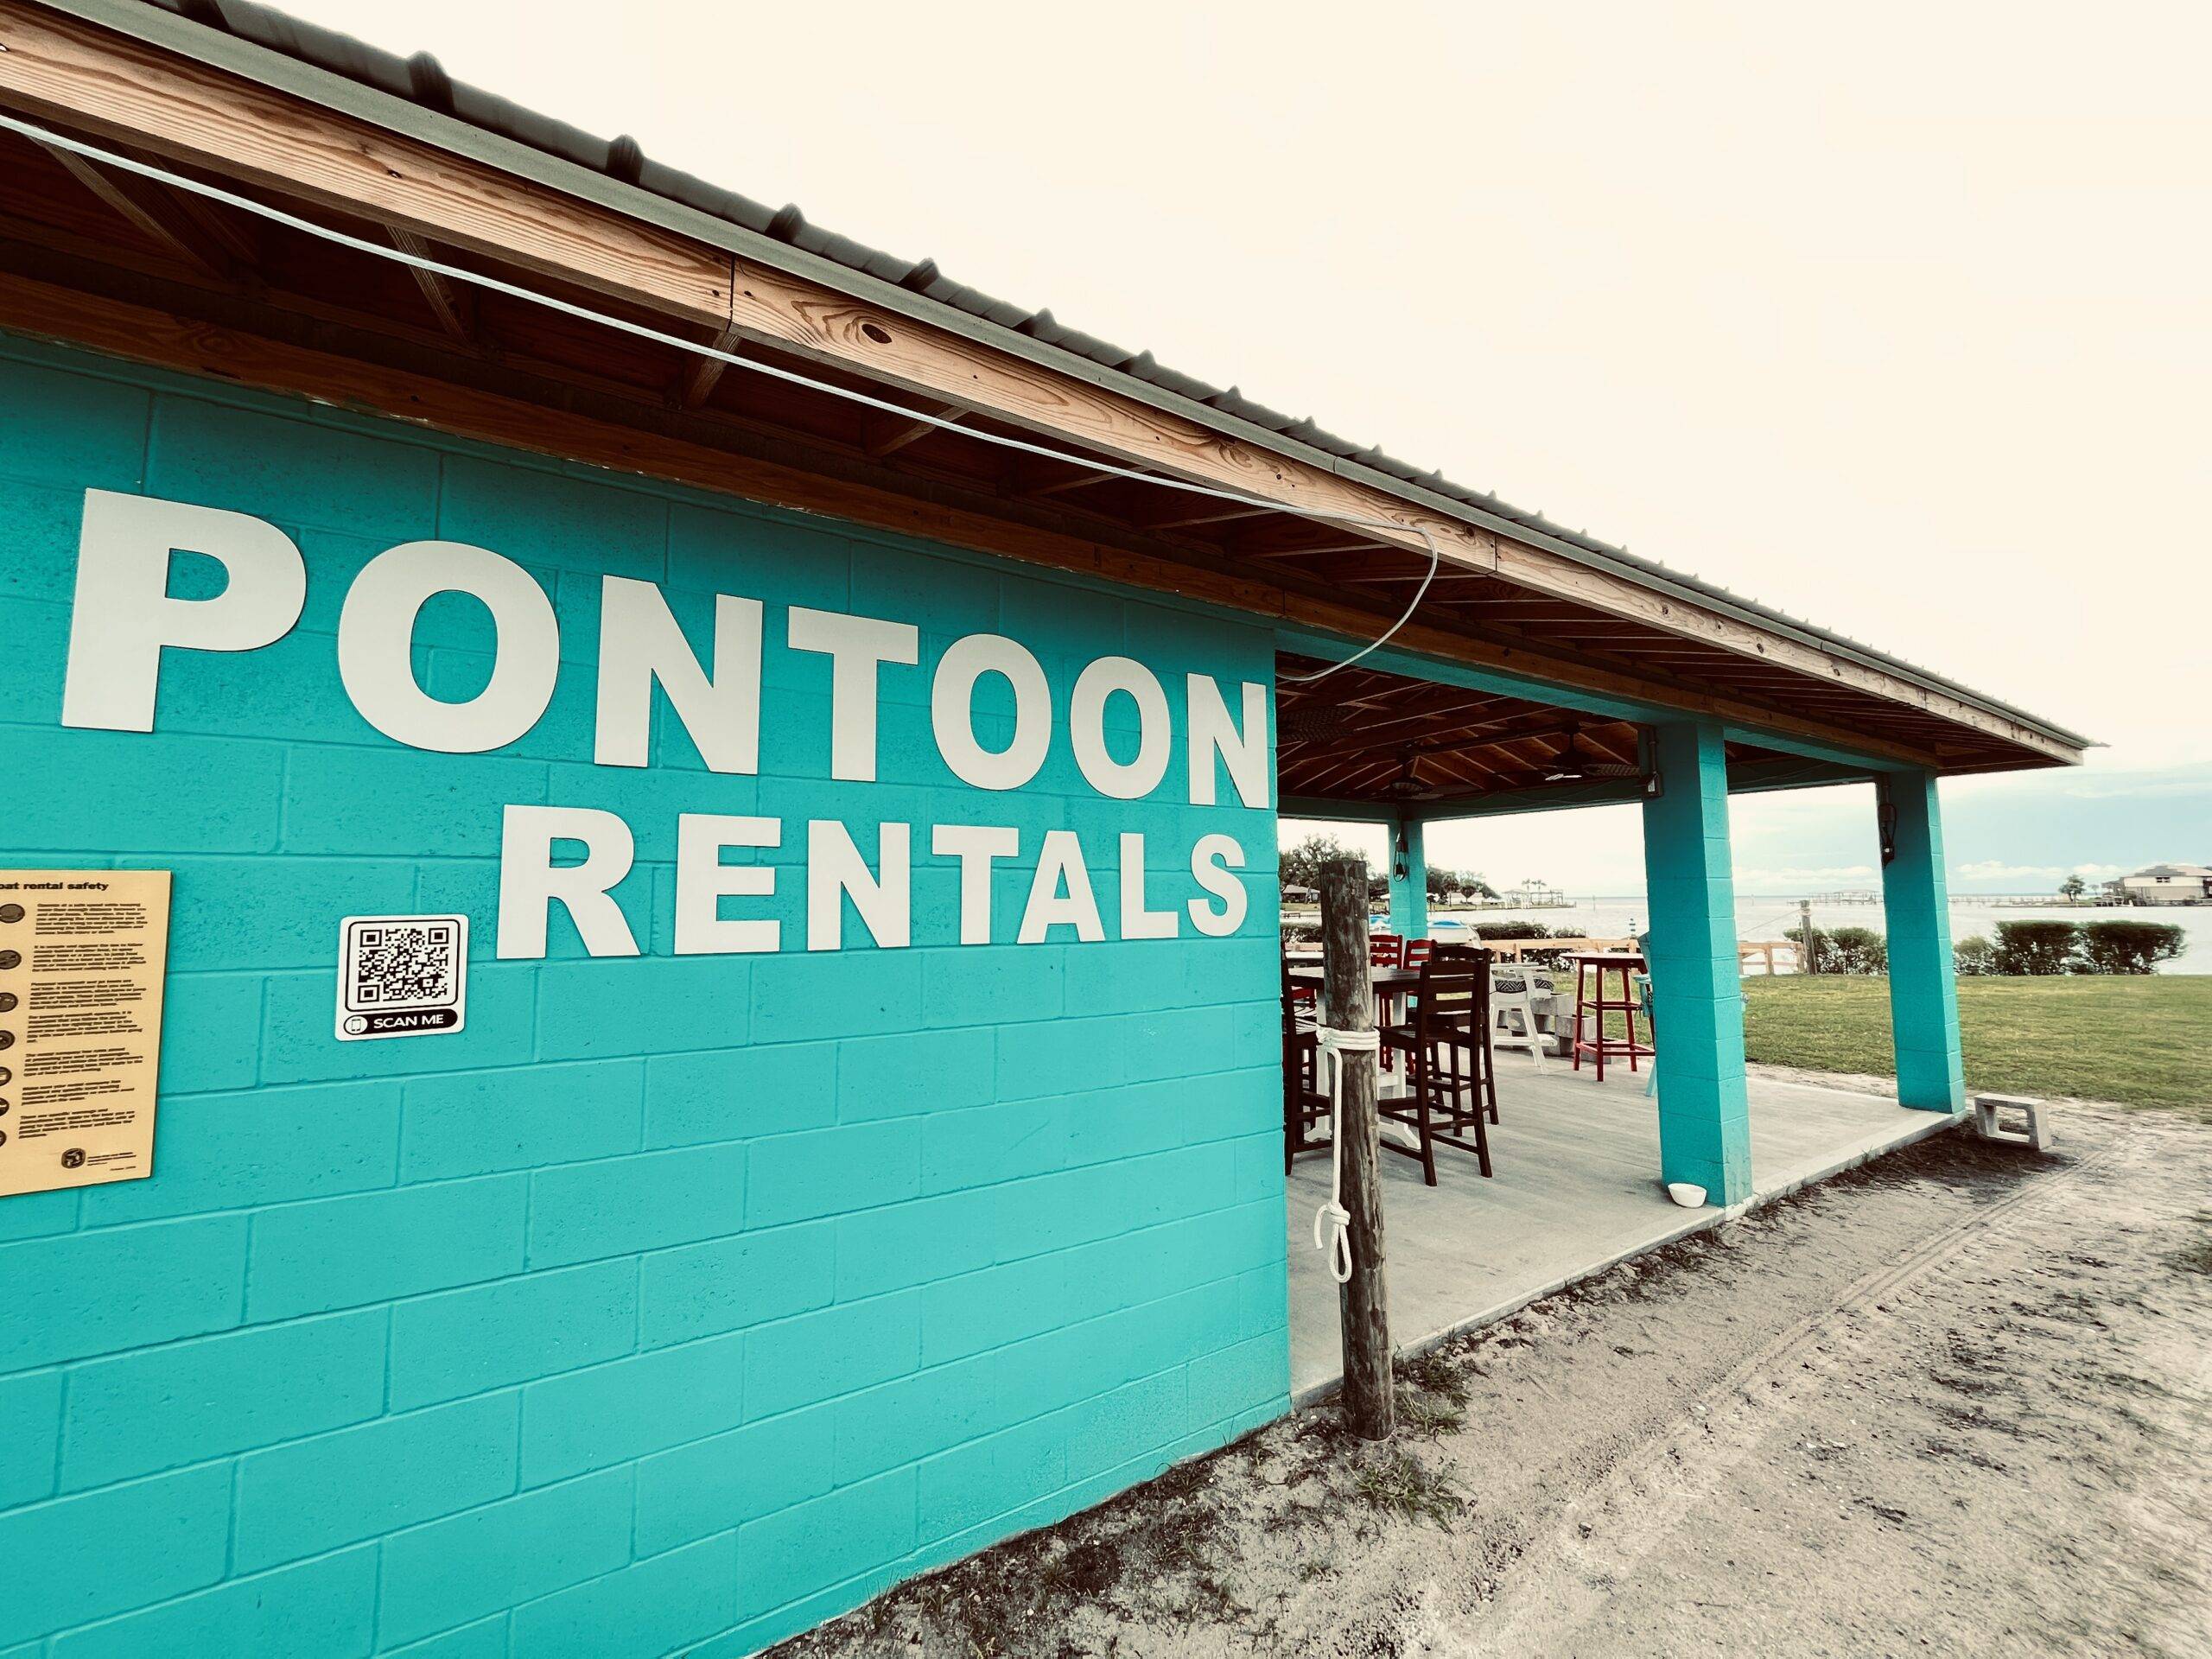 Turquoise "PONTOON RENTALS" building in Panama City, inviting for a boating adventure.